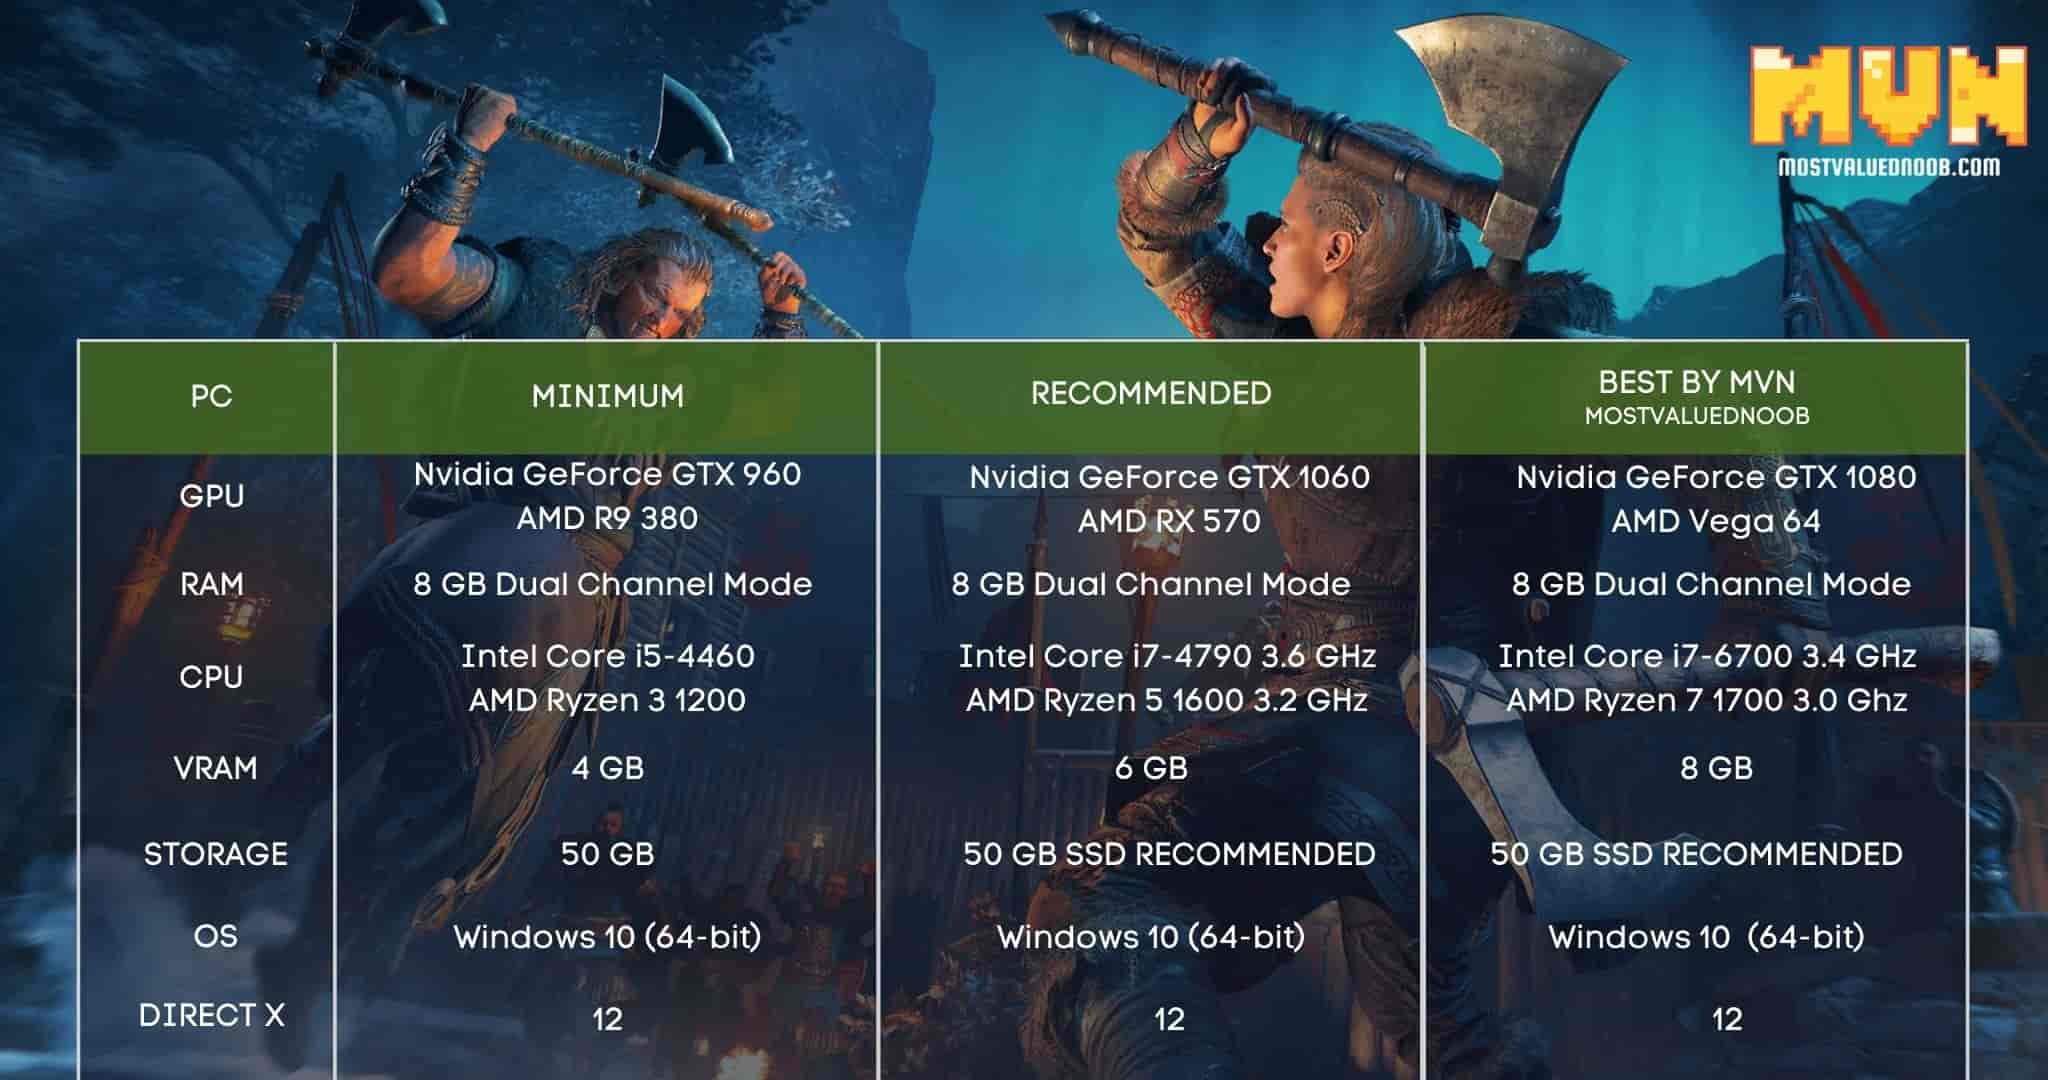 Assassins Creed Valhalla System Requirements